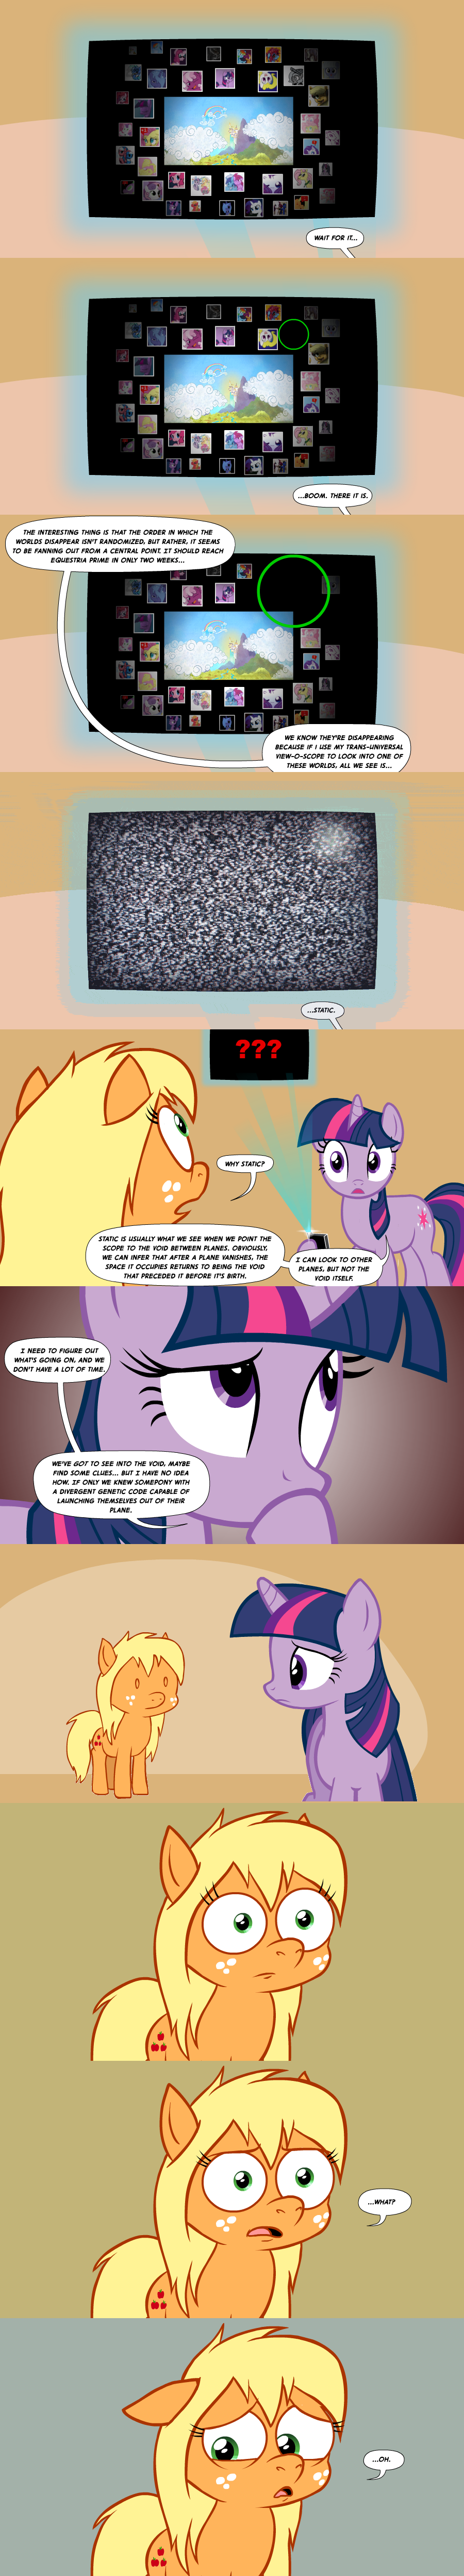 apple applejack_(mlp) ask_berry_punch ask_eldritch_discord ask_flutterfuckershy ask_fluttershy_and_pinkie_pie ask_jappleack ask_mcblobs ask_pinkie_pie ask_pinkie_pie_solutions ask_princess_molestia ask_smarty_belle ask_stoned_trixie ask_surprise ask_sweetiepoo ask_twilight ask_twilightsparklelovessex big_macintosh_(mlp) blonde_hair bound building canterlot castle cheerilee_(mlp) cloud clouds comic cutie_mark dialog discord_(mlp) eldritch_discord english english_text equestria equine female feral flutterfuckershy fluttershy_(mlp) friendship_is_magic fruit glitchy_hooves_responds green_eyes hair horn horse hotdiggedydemon loona loonadventure lotus_(mlp) male mammal mcblobs moonstuck mountain multiverse my_little_pony naughty_luna naughty_naughty_luna naughty_side_of_the_moon nigel_thornberry oh_dat_cheerilee open_mouth pda pinkie_pie_(mlp) pinkie_pie_answers pony princess princess_celestia_(mlp) princess_luna_(mlp) purple_eyes rainbow rainbow_dash_(mlp) rarity_(mlp) river rope royalty science scootaloo_(mlp) sky smarty_belle speech_bubbles spike_(mlp) spike_replies square_crossover stoned_trixie surprise_(mlp) sweetie_belle_(mlp) sweetiepoo teeth television text tongue tooth trixie_(mlp) tumblr twilight_sparkle_(mlp) two_tone_hair unicorn what what_has_science_done woona woonastuck worried